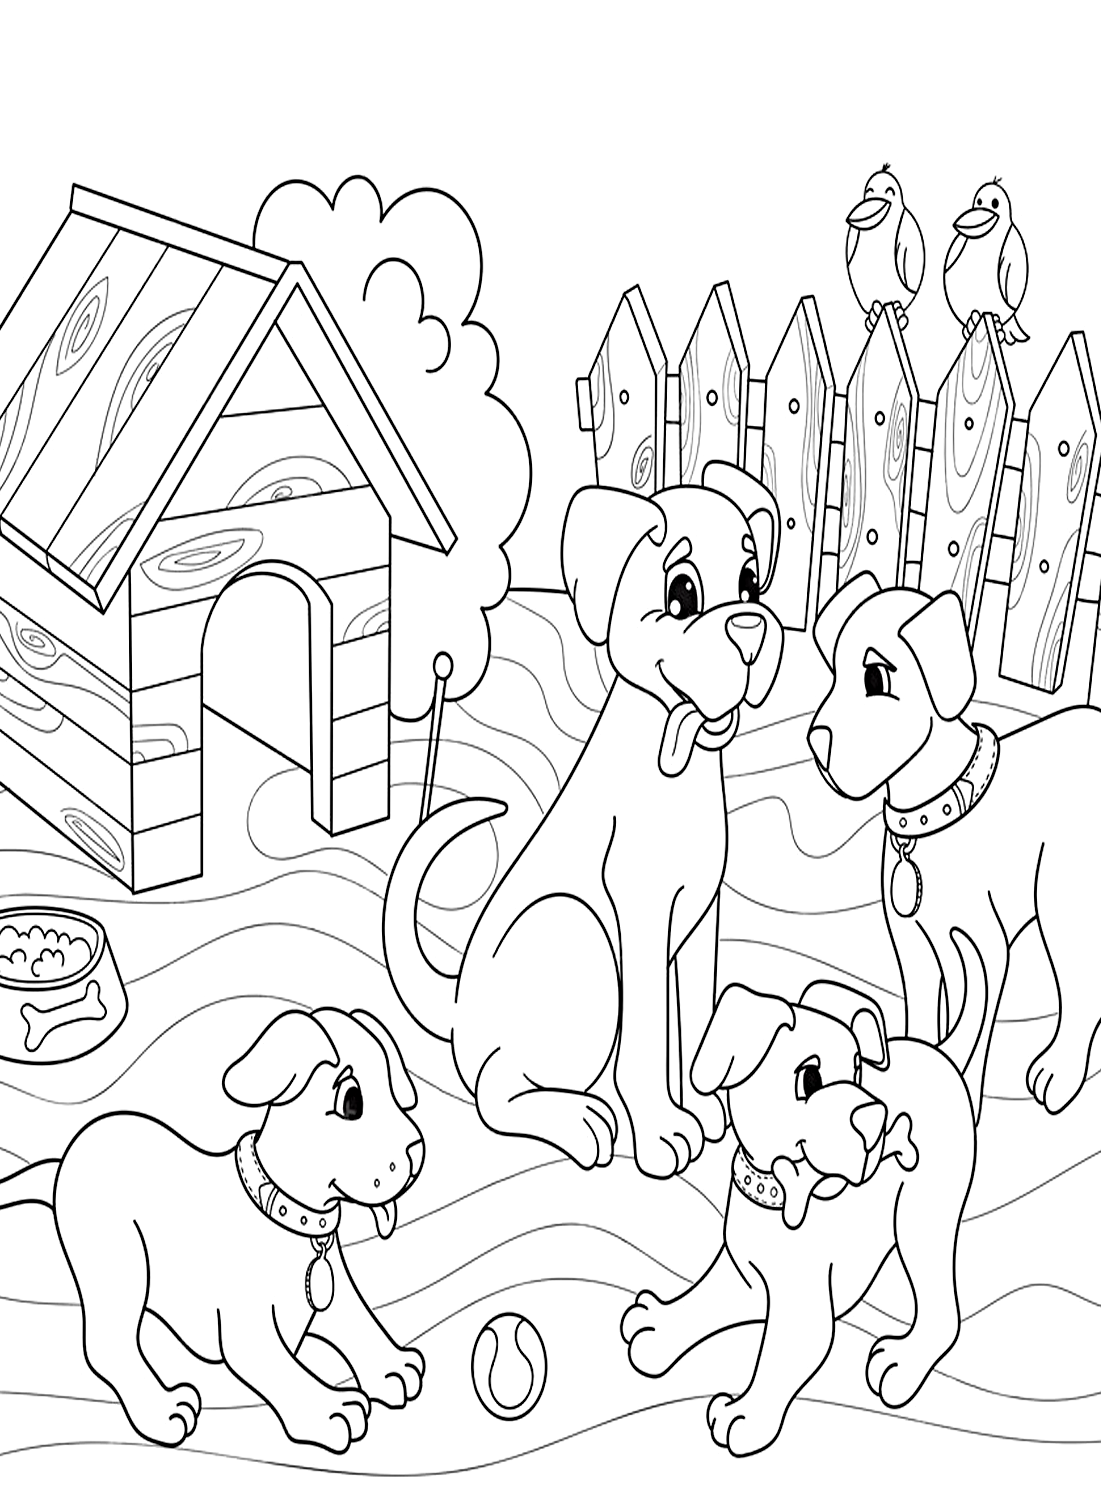 Fun Puppy Coloring Pages